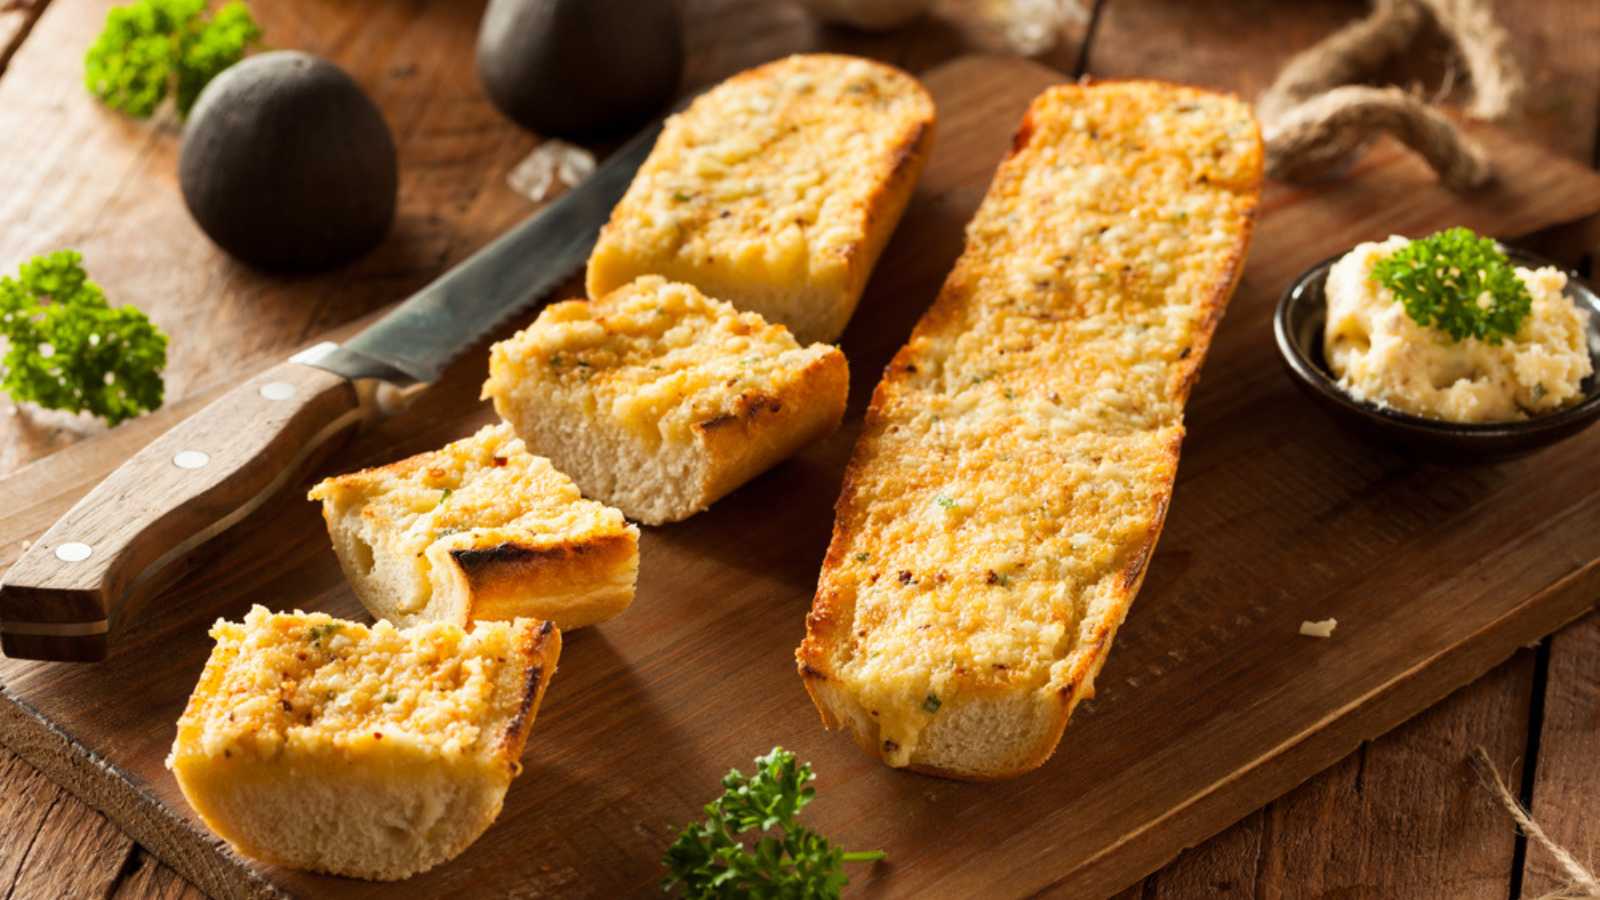 Cheese on bread.